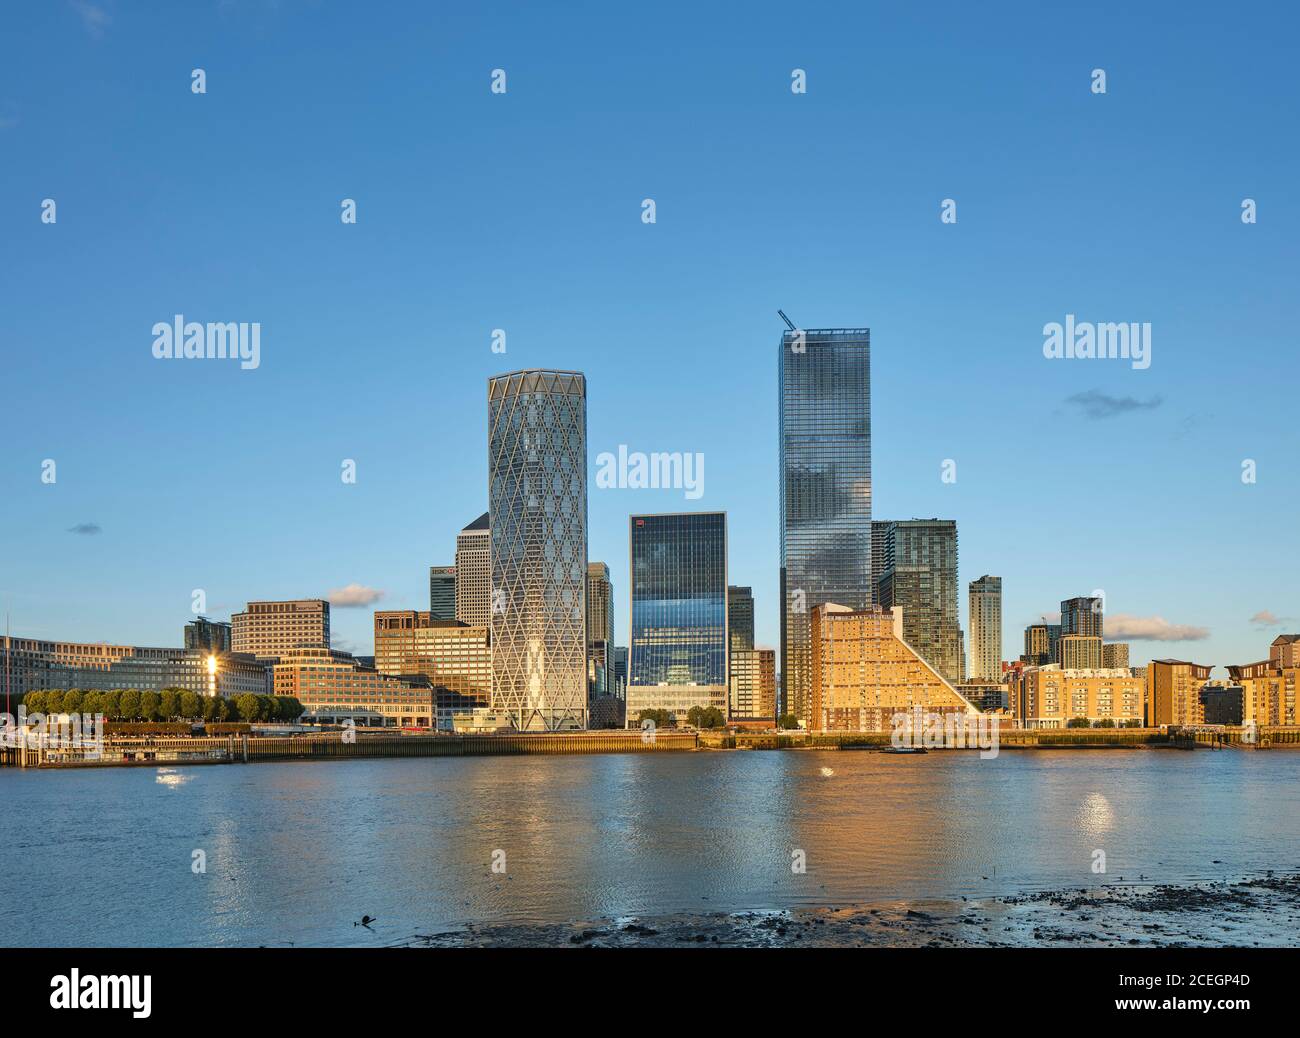 Low tide Thames and Canary Wharf skyline. Newfoundland Tower, London, United Kingdom. Architect: Horden Cherry Lee Architects Ltd, 2020. Stock Photo